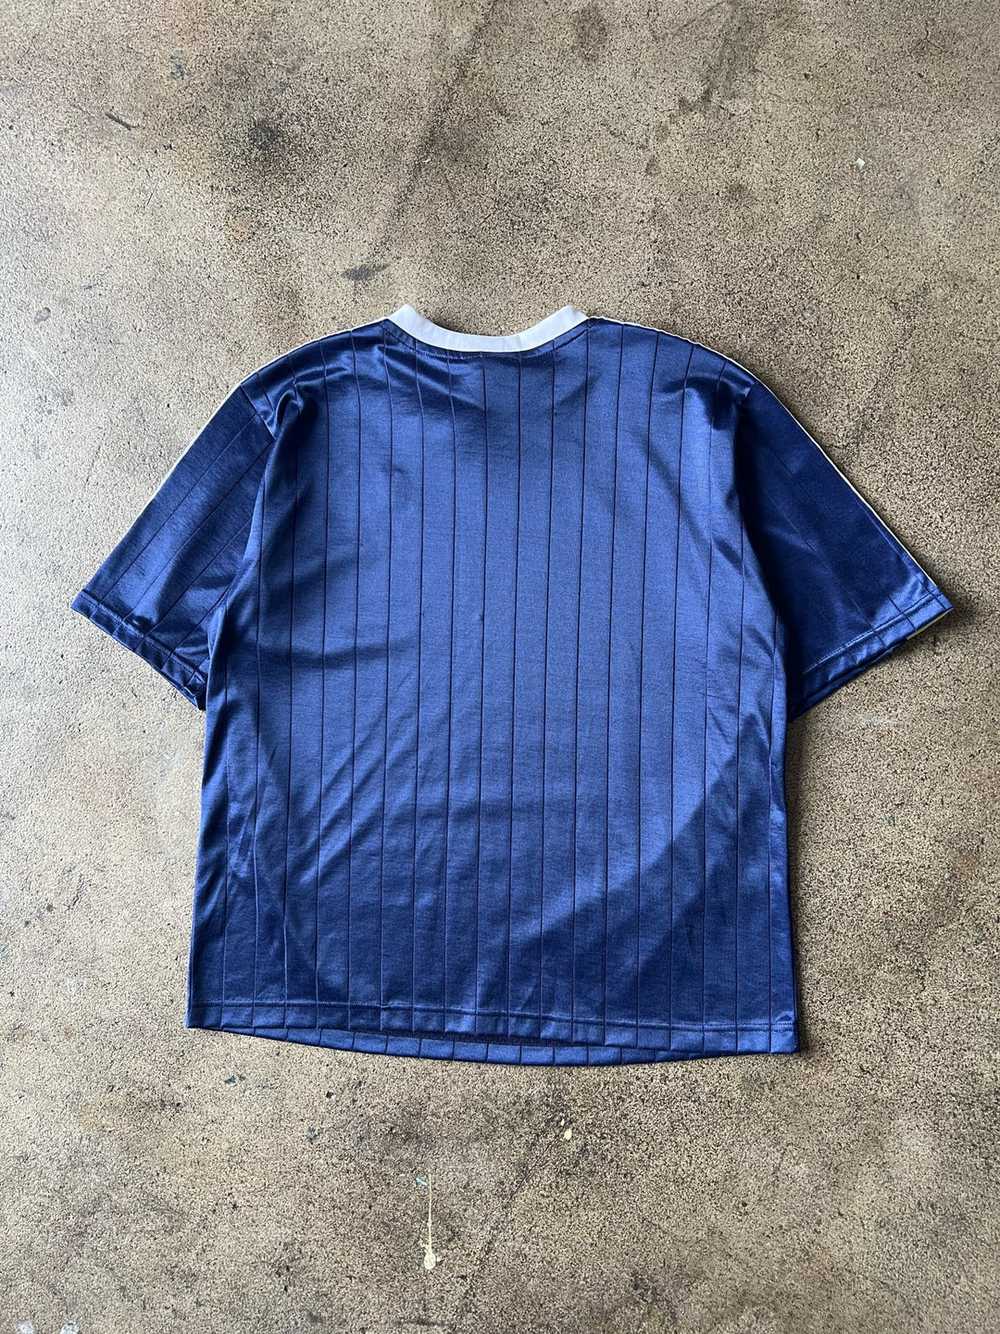 1990s Adidas Soccer Jersey - image 3